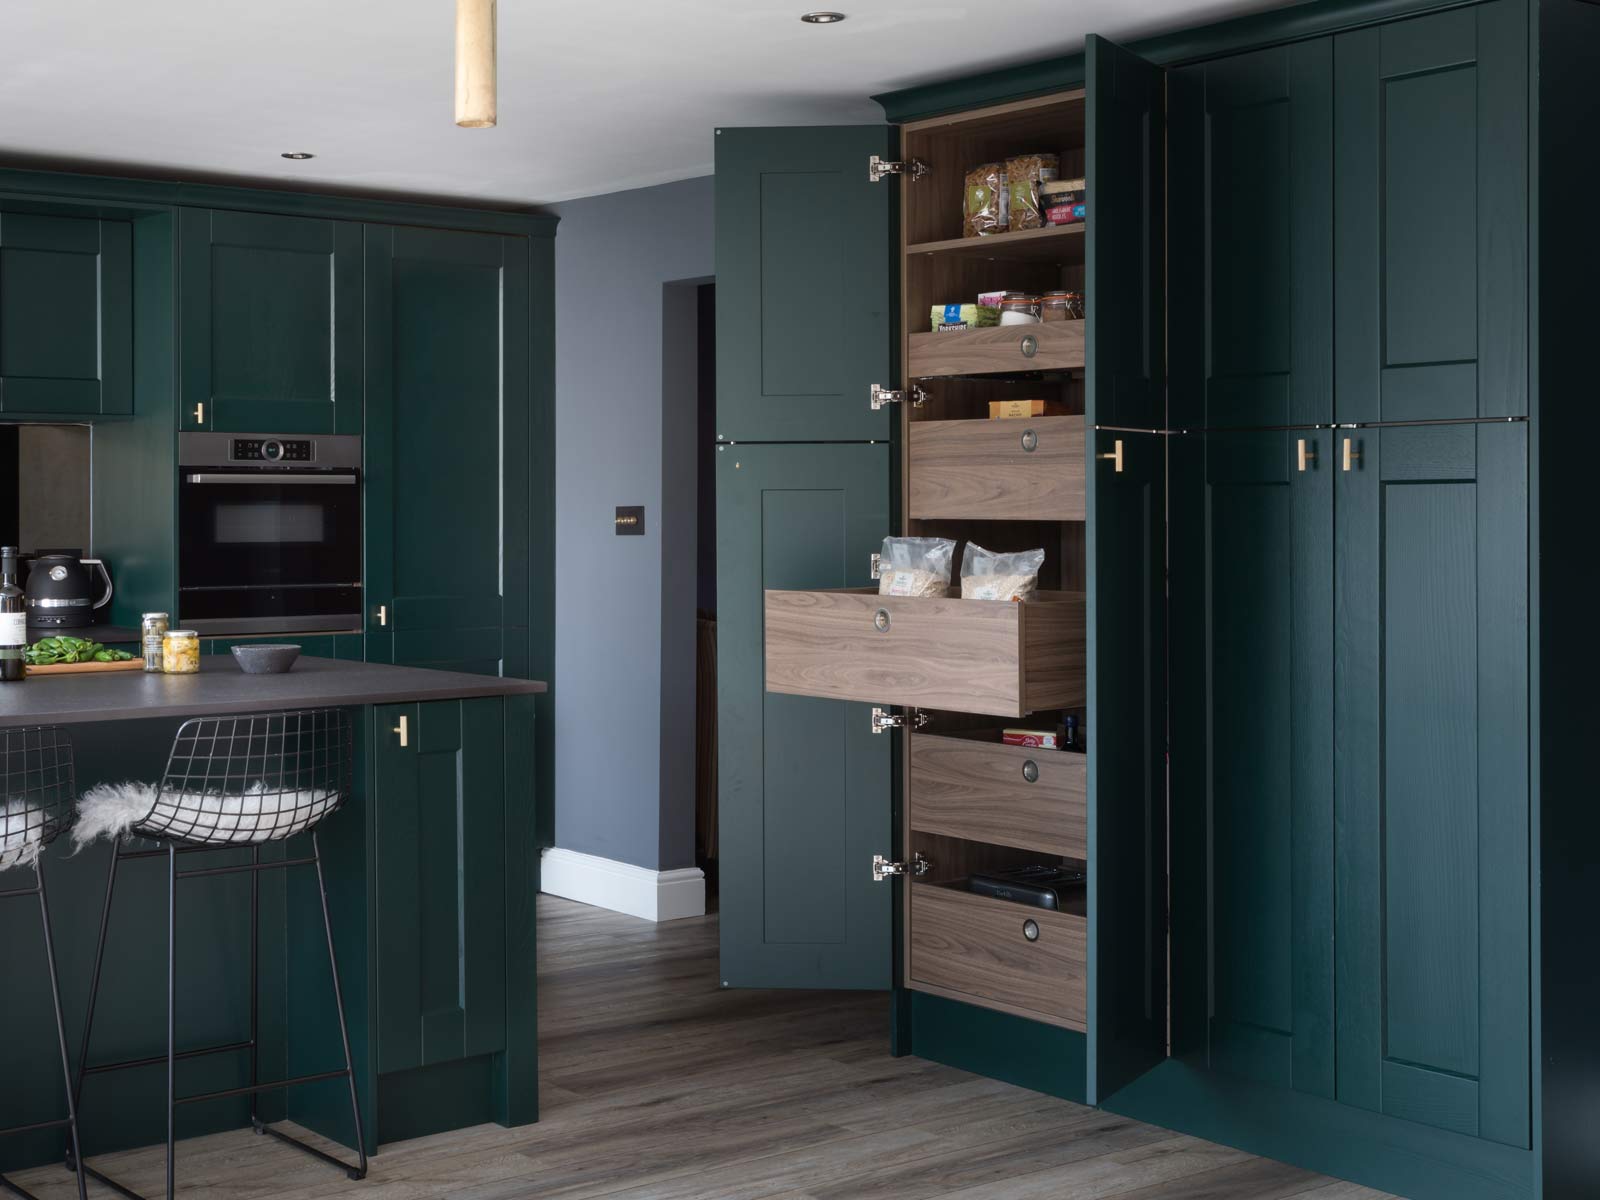 Green kitchen with a pantry with dark wood shelves